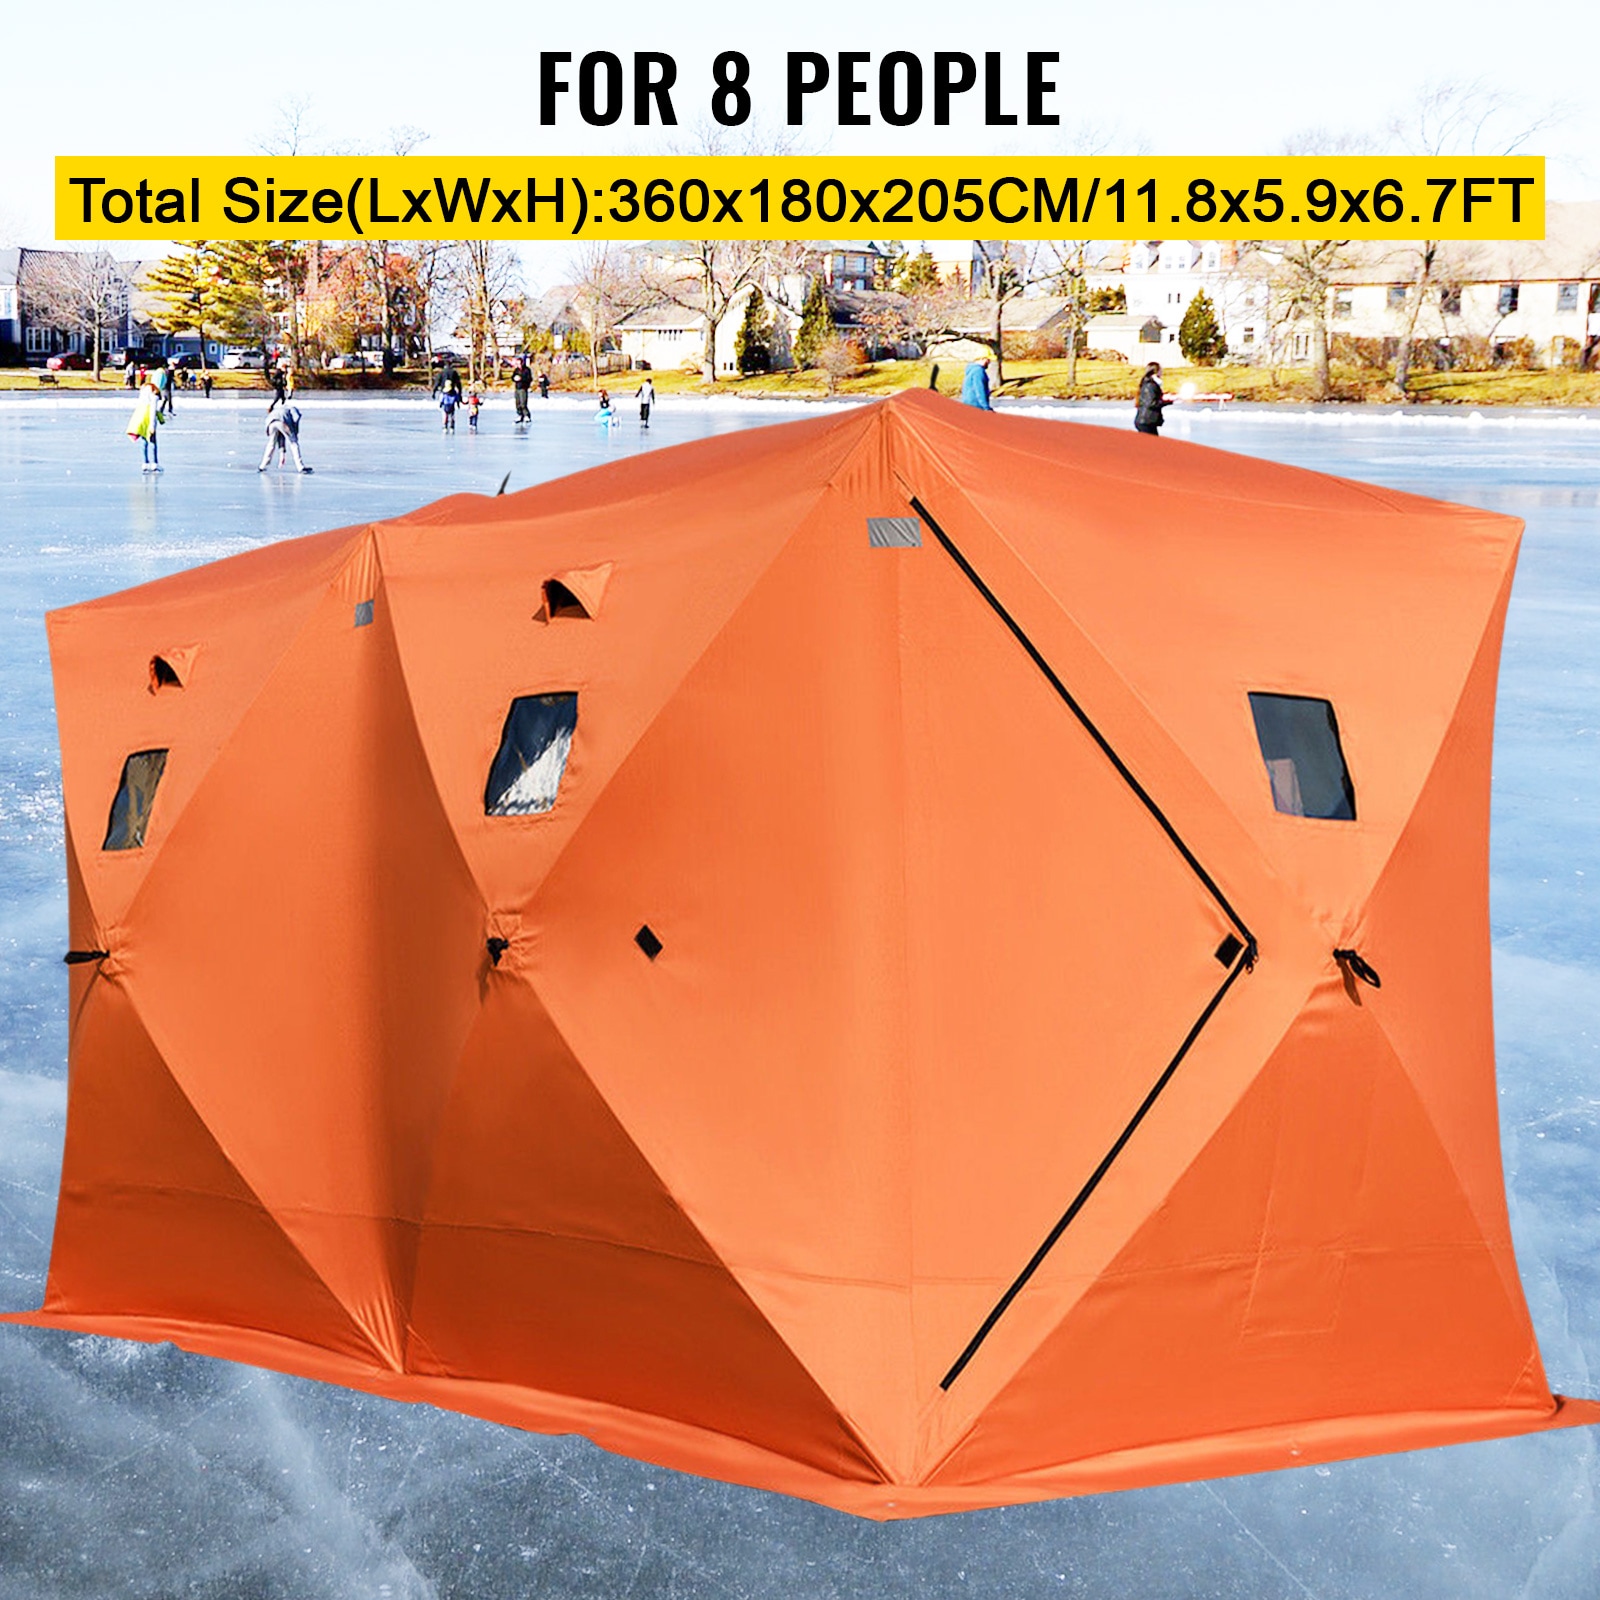 EVER SLEEP IN A POP UP SHELTER? - Ice Fishing Forum - Ice Fishing